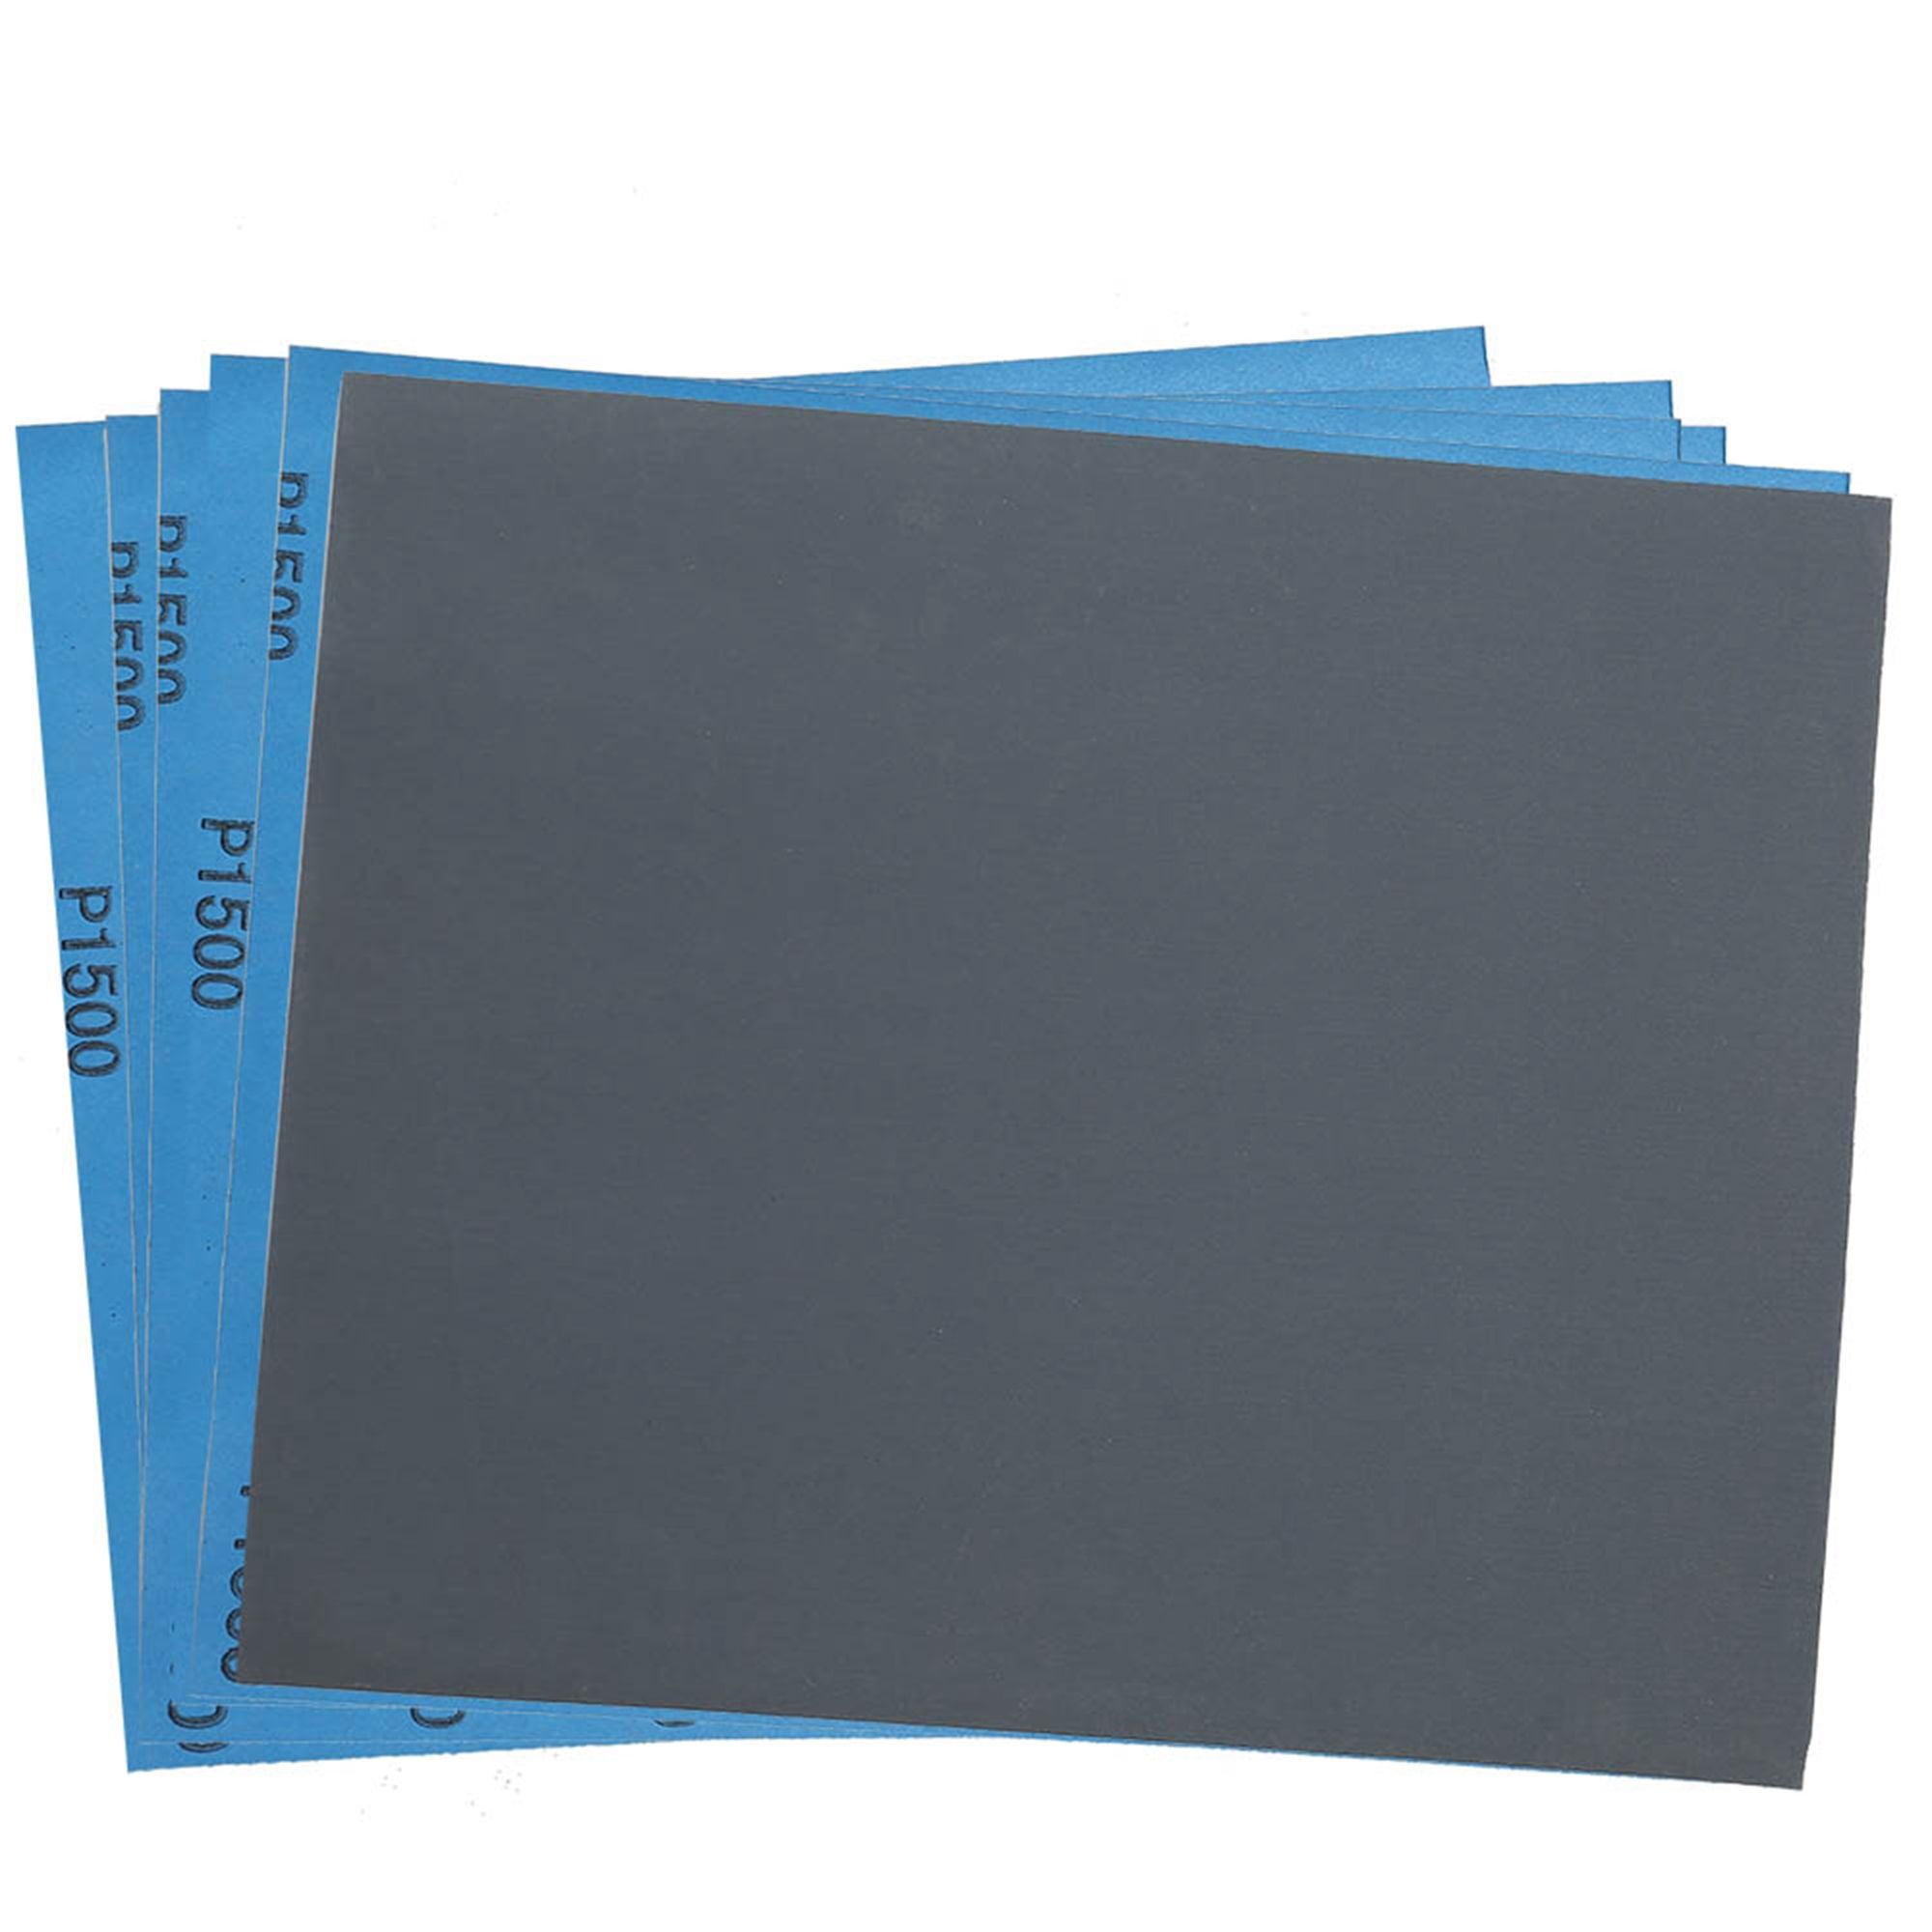 25 Pack, 2500 Grit Perfect Sanding Supply by Abrasive Resource 5.5 X 9 Wet or Dry Waterproof Silicon Carbide Sandpaper 